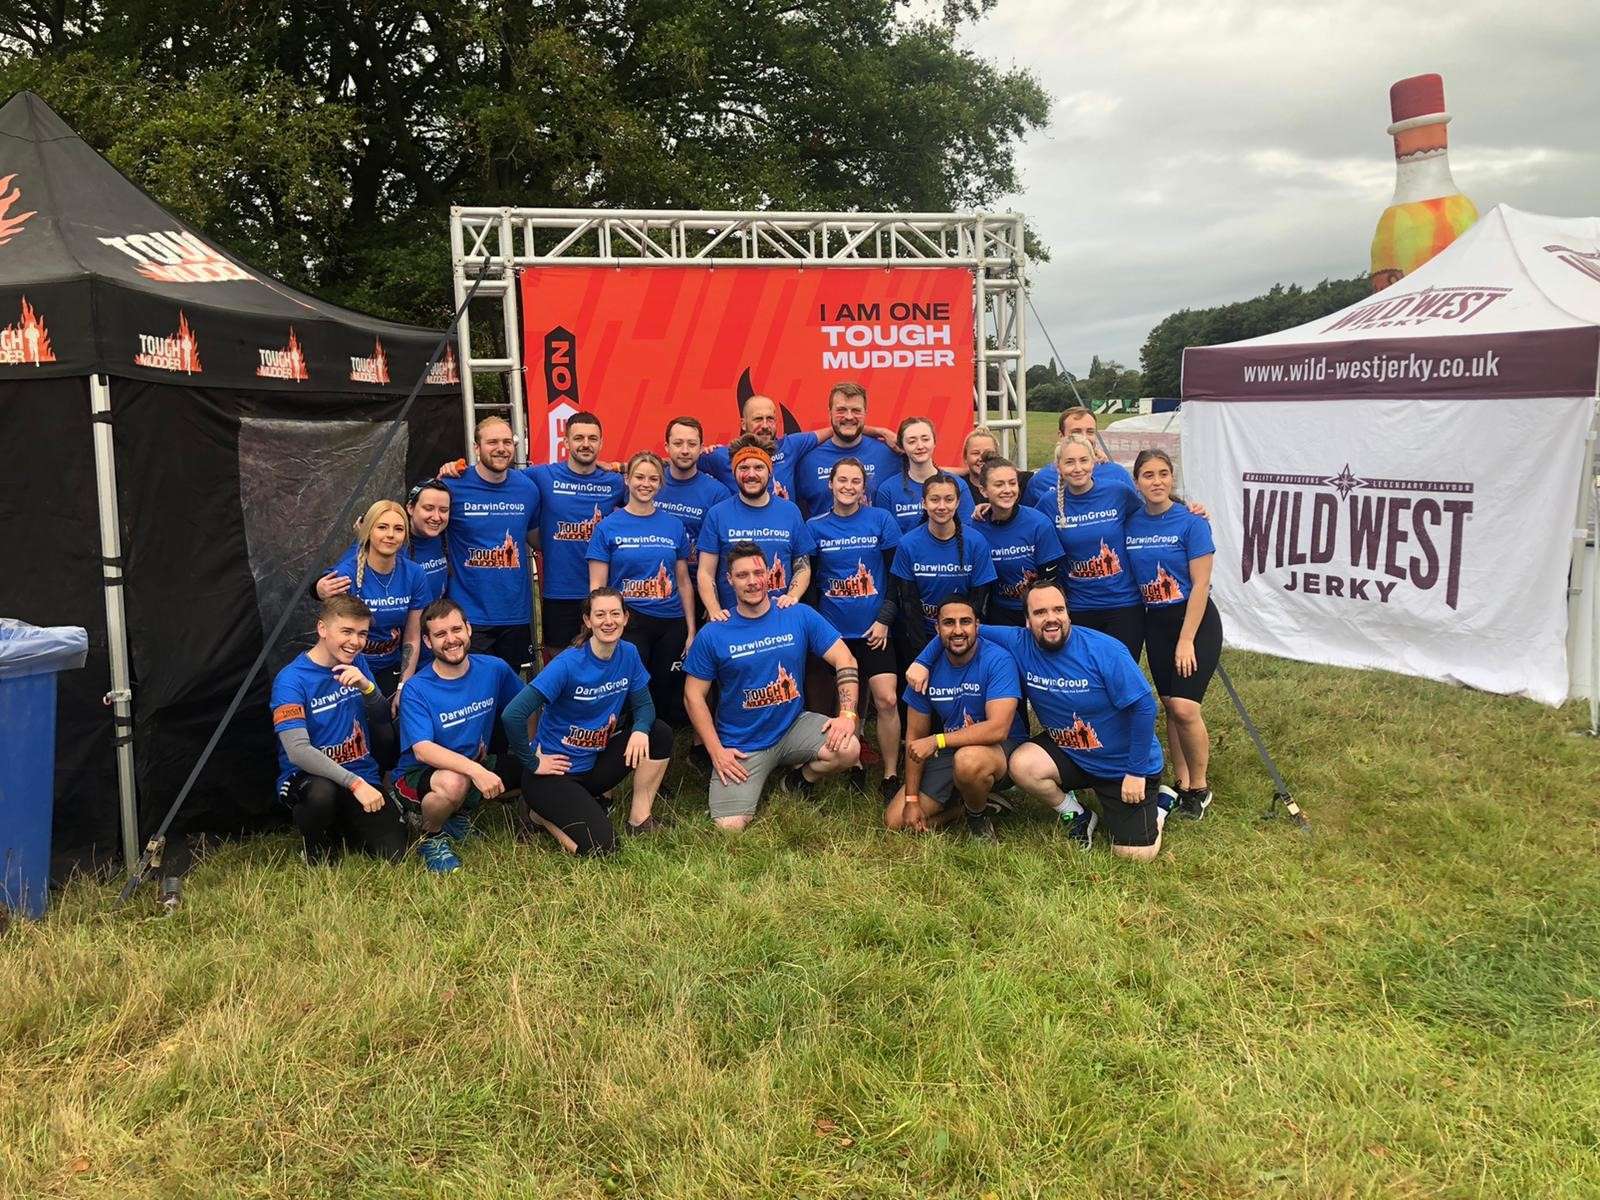 The Darwin Group team in a group photo before they started the Tough Mudder challenge. They're in a grass field with gazebos to either side.